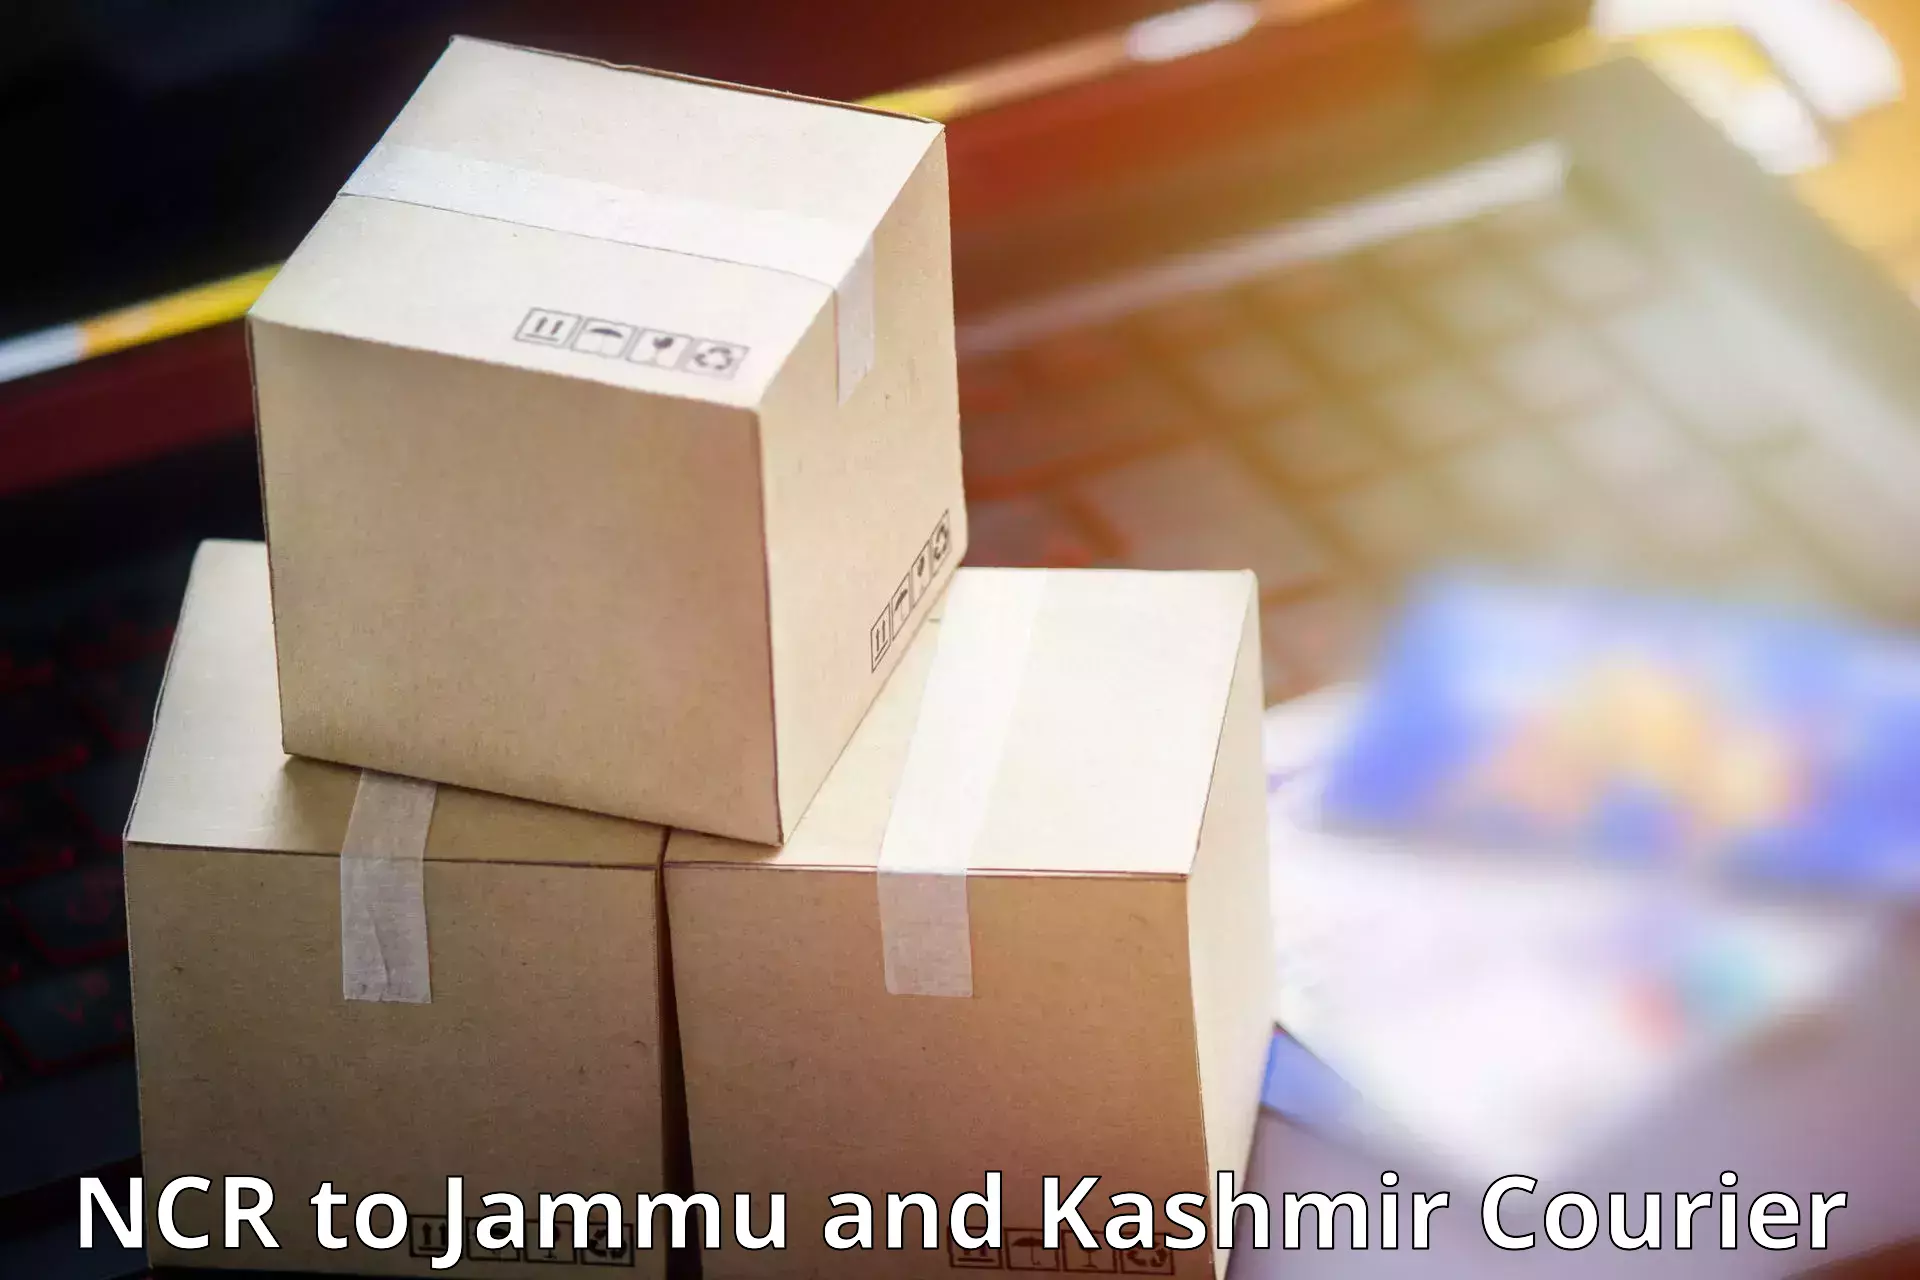 Express delivery network NCR to University of Jammu